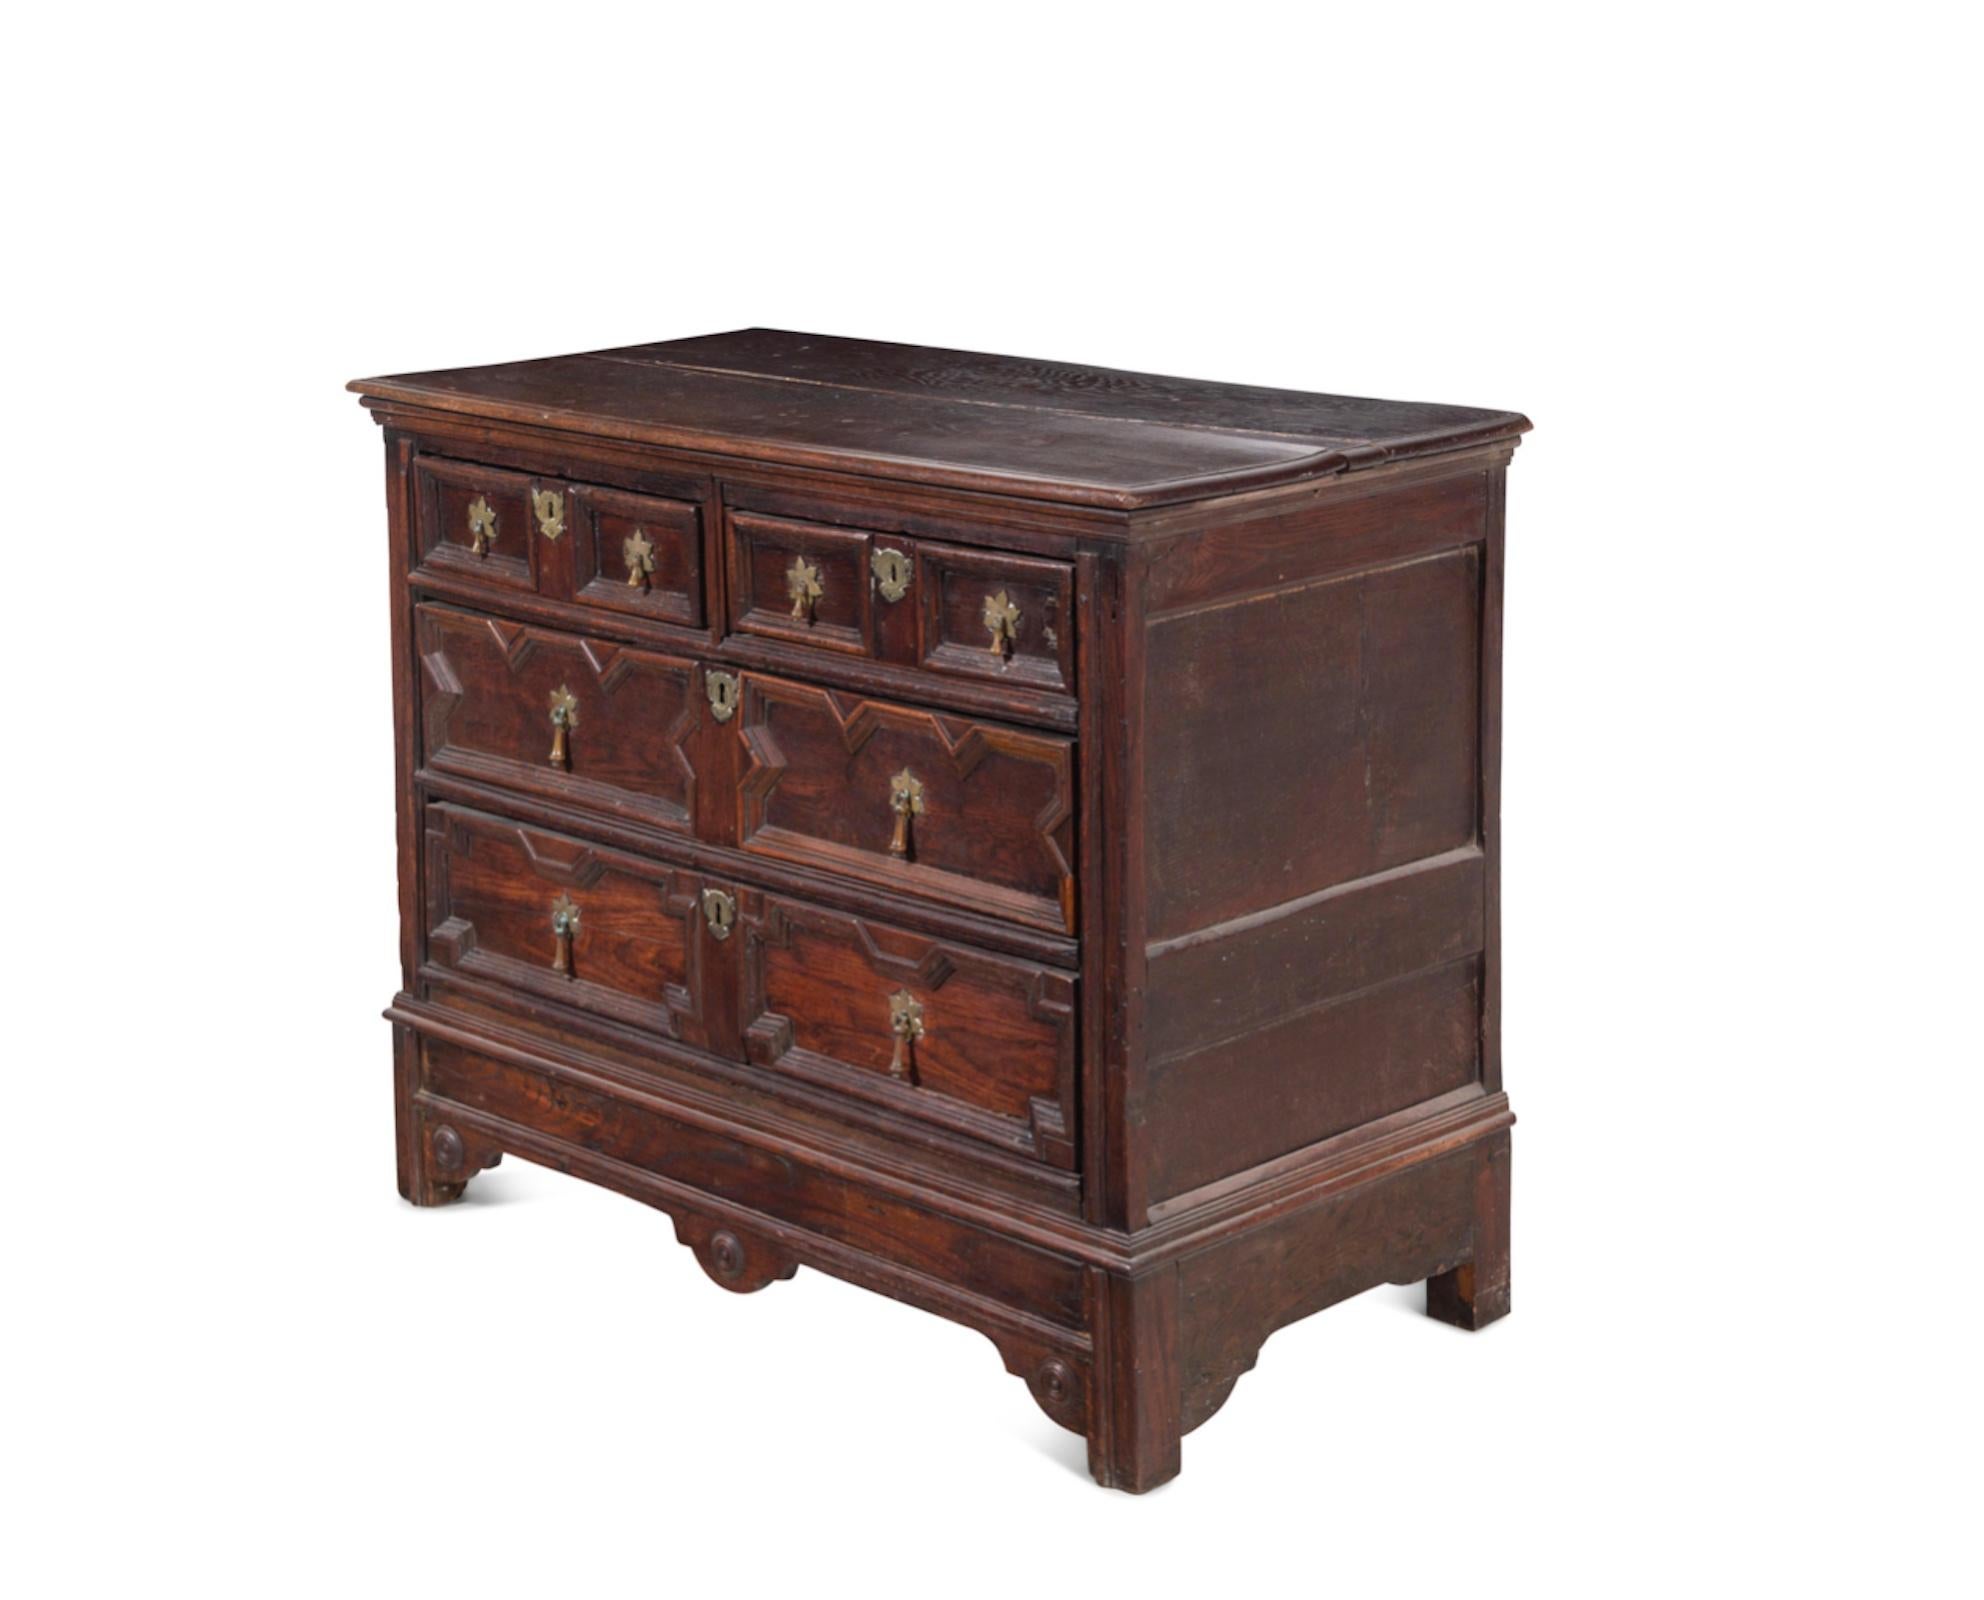 A Charles II Oak Chest of Drawers
Late 17th/Early 18th Century.  Great piece in both traditional and contemporary settings.
Height 35 x width 44 1/4 x depth 21 3/4 inches.